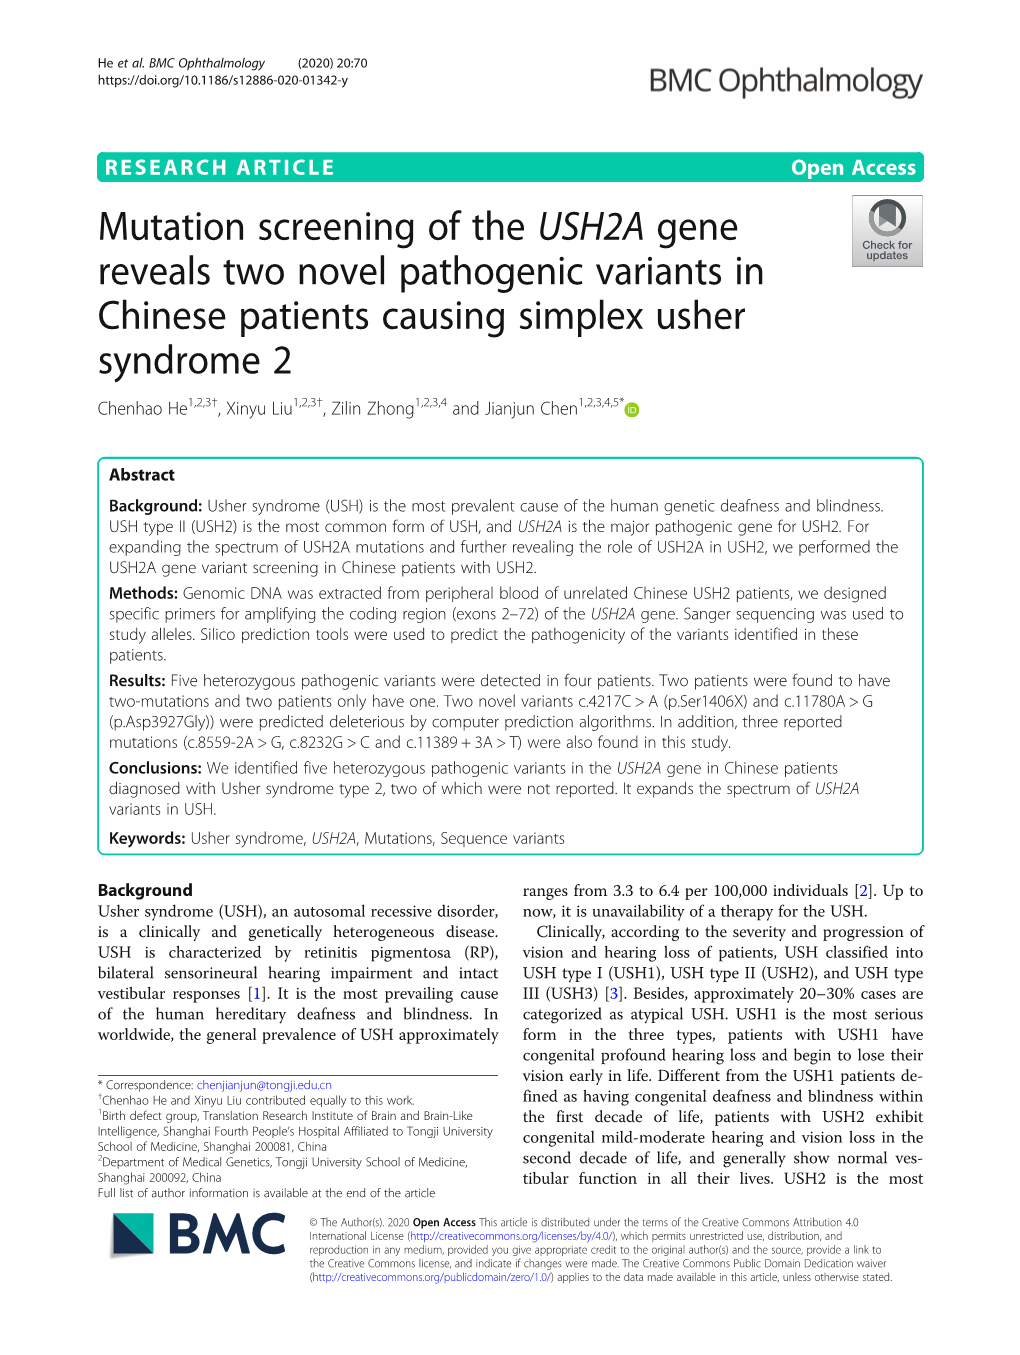 Mutation Screening of the USH2A Gene Reveals Two Novel Pathogenic Variants in Chinese Patients Causing Simplex Usher Syndrome 2